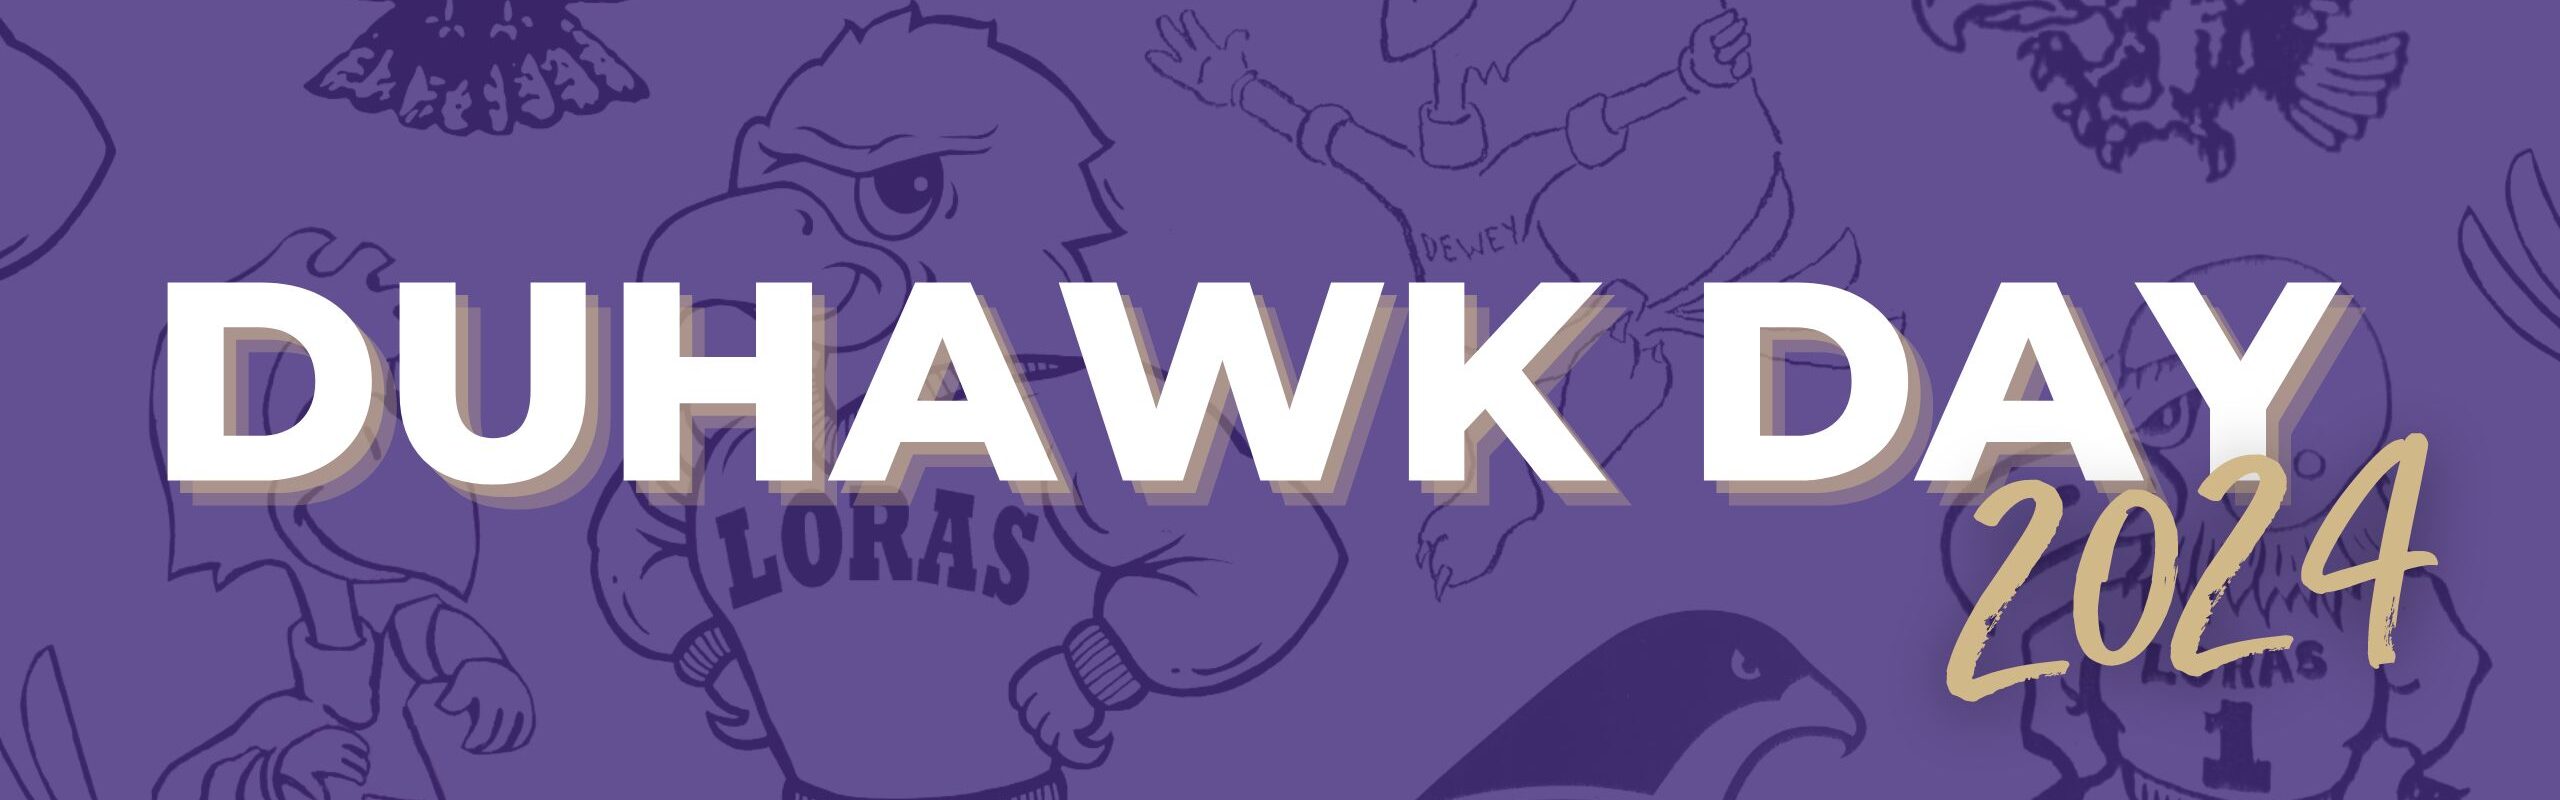 Duhawk Day with purple background